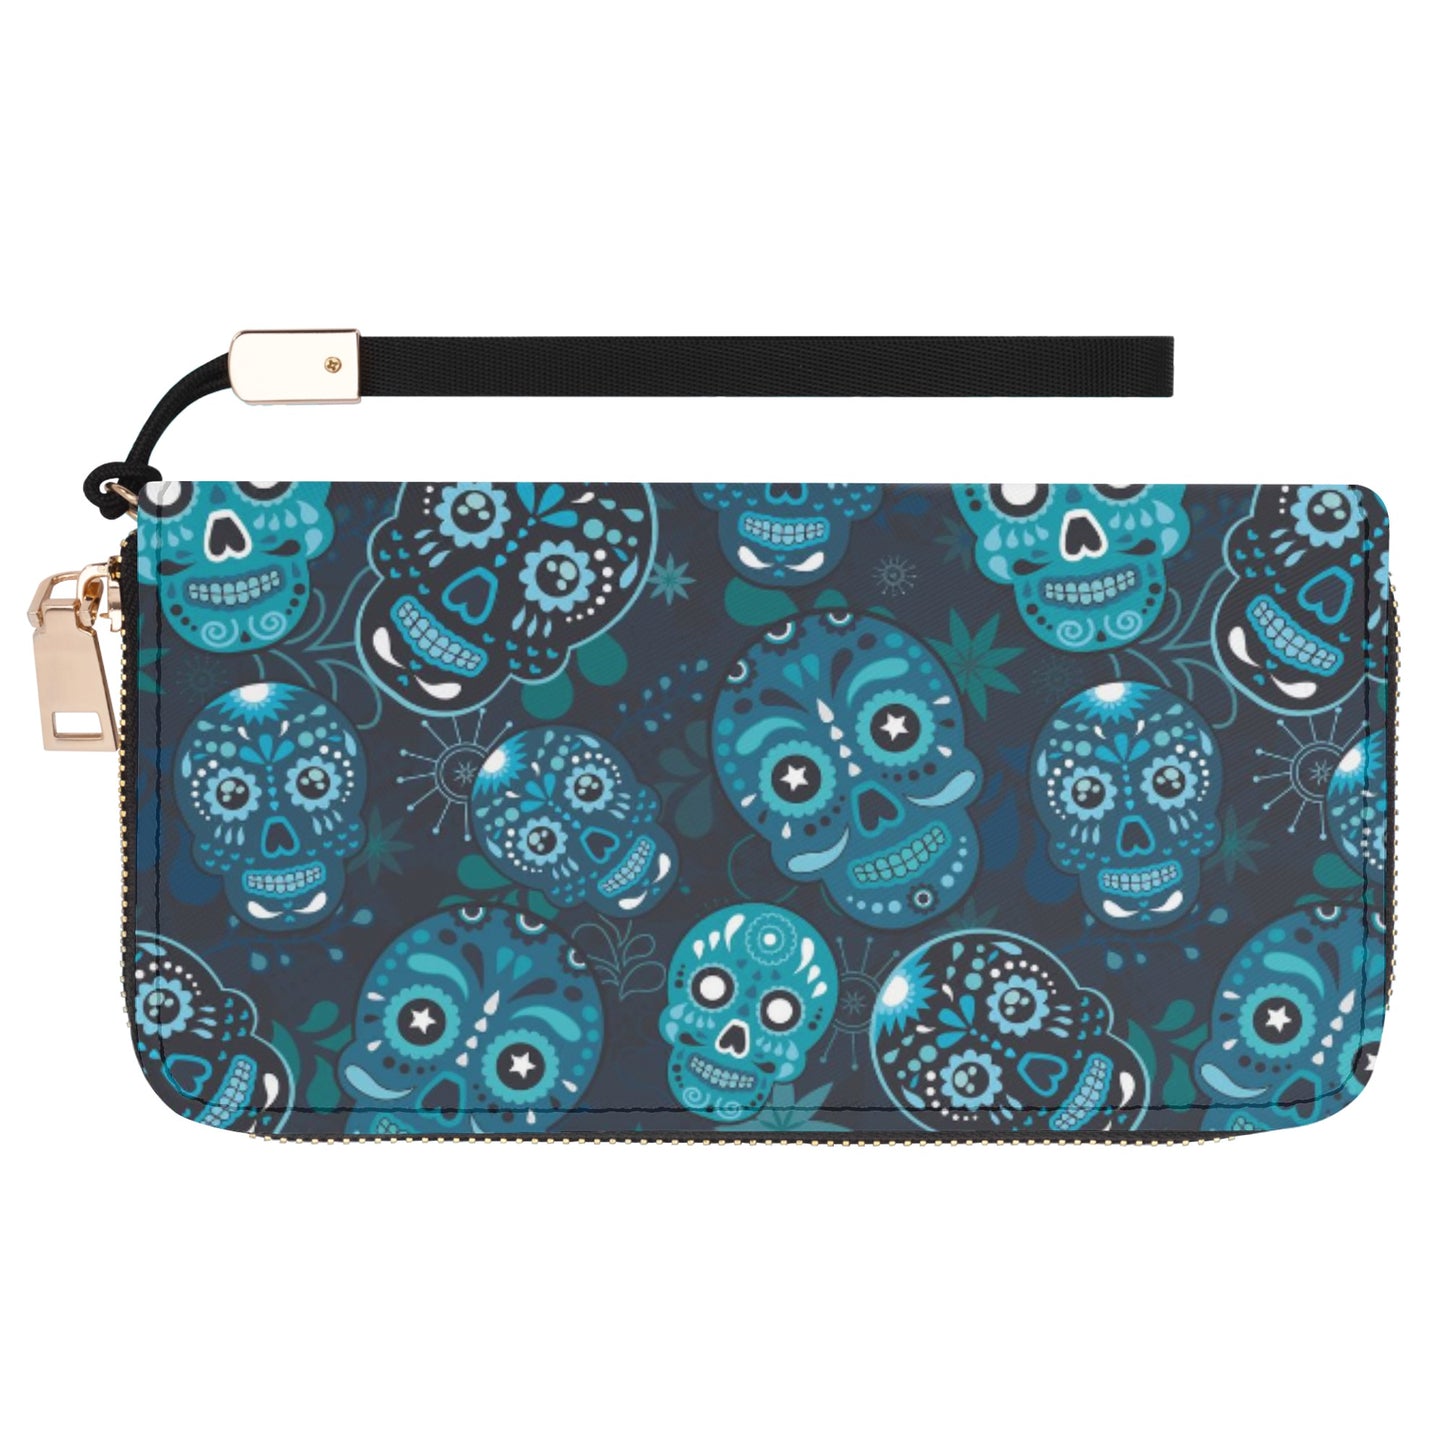 Sugar skull day of the dead Halloween gothic Casual Clutch Wallet